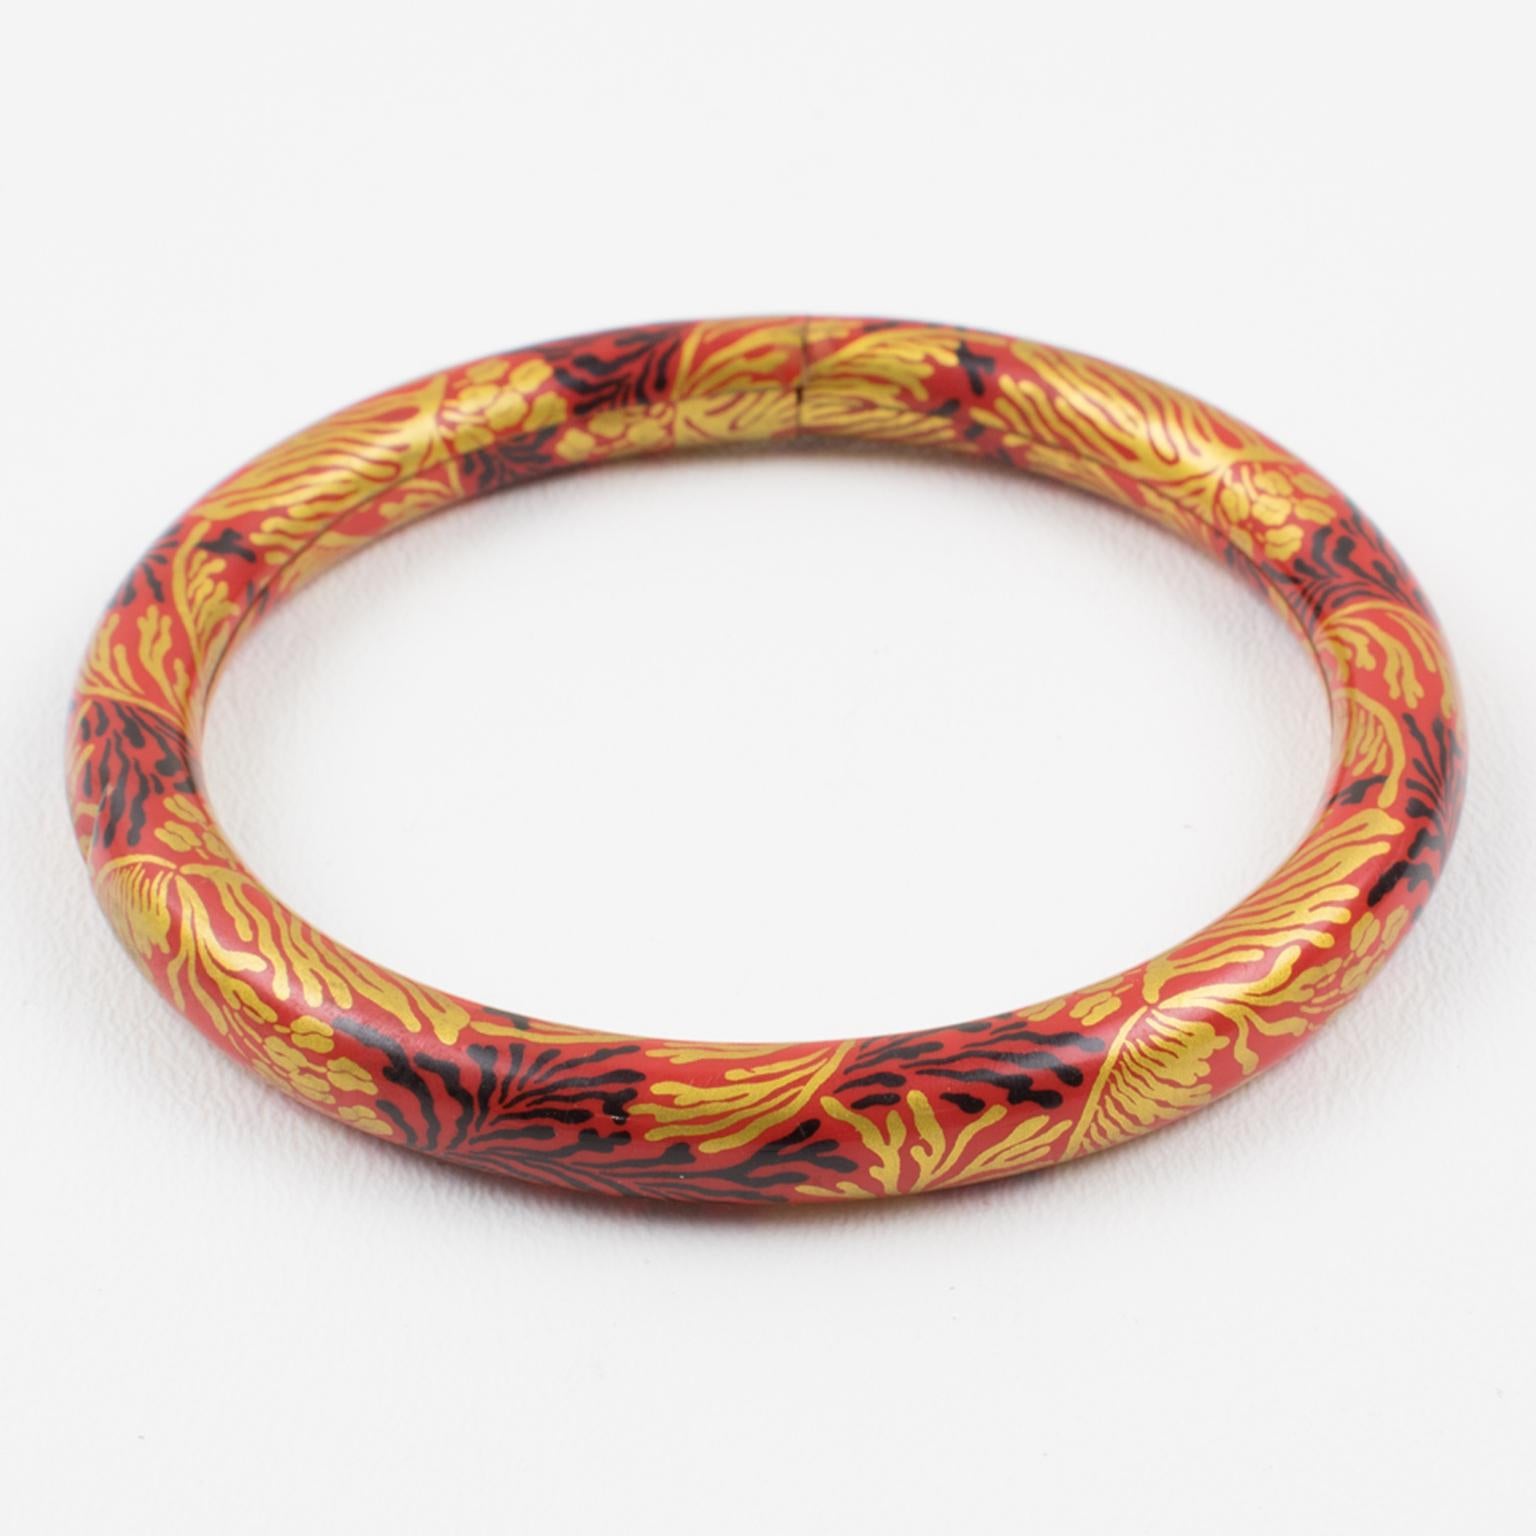 A superb 1920s French Art Deco celluloid bracelet bangle. It features a light hollow tube shape with an Asian-inspired 